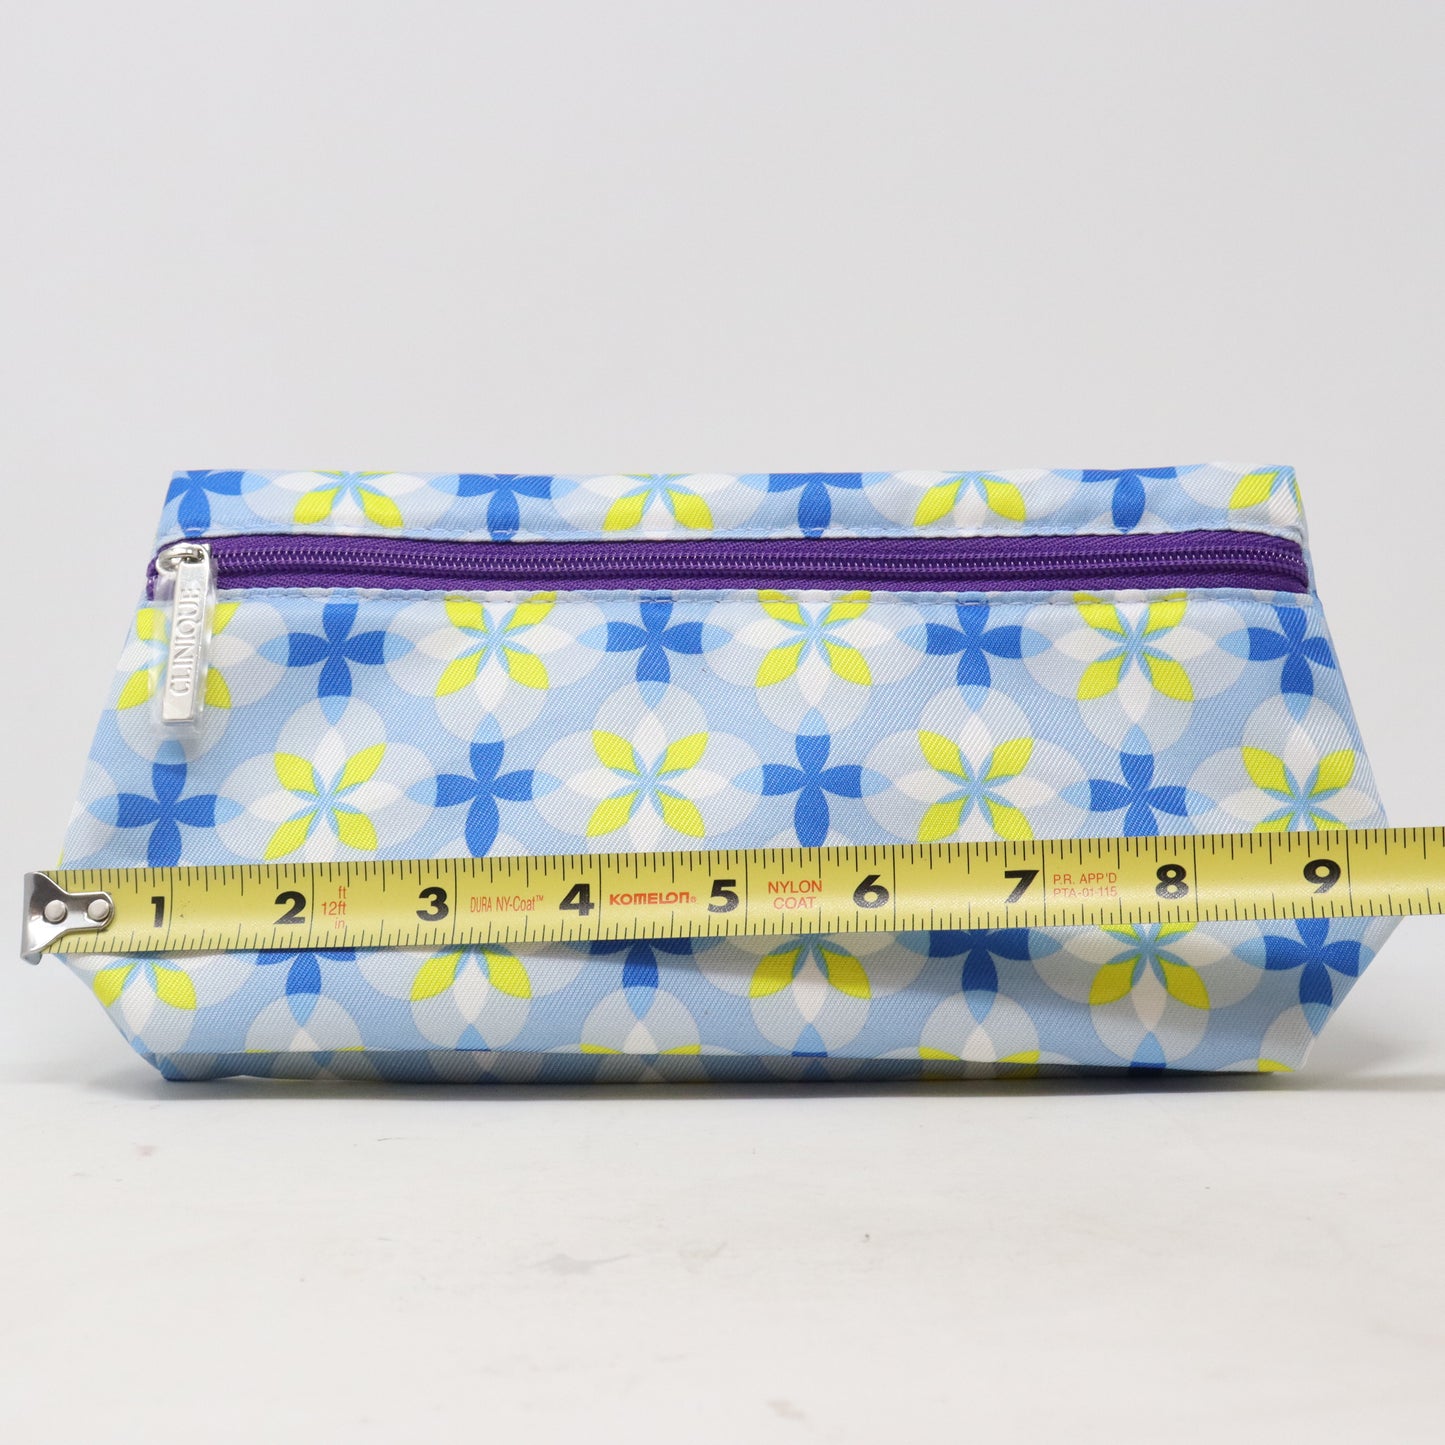 Clinique Blue Flower Print Cosmetic Bag  / New